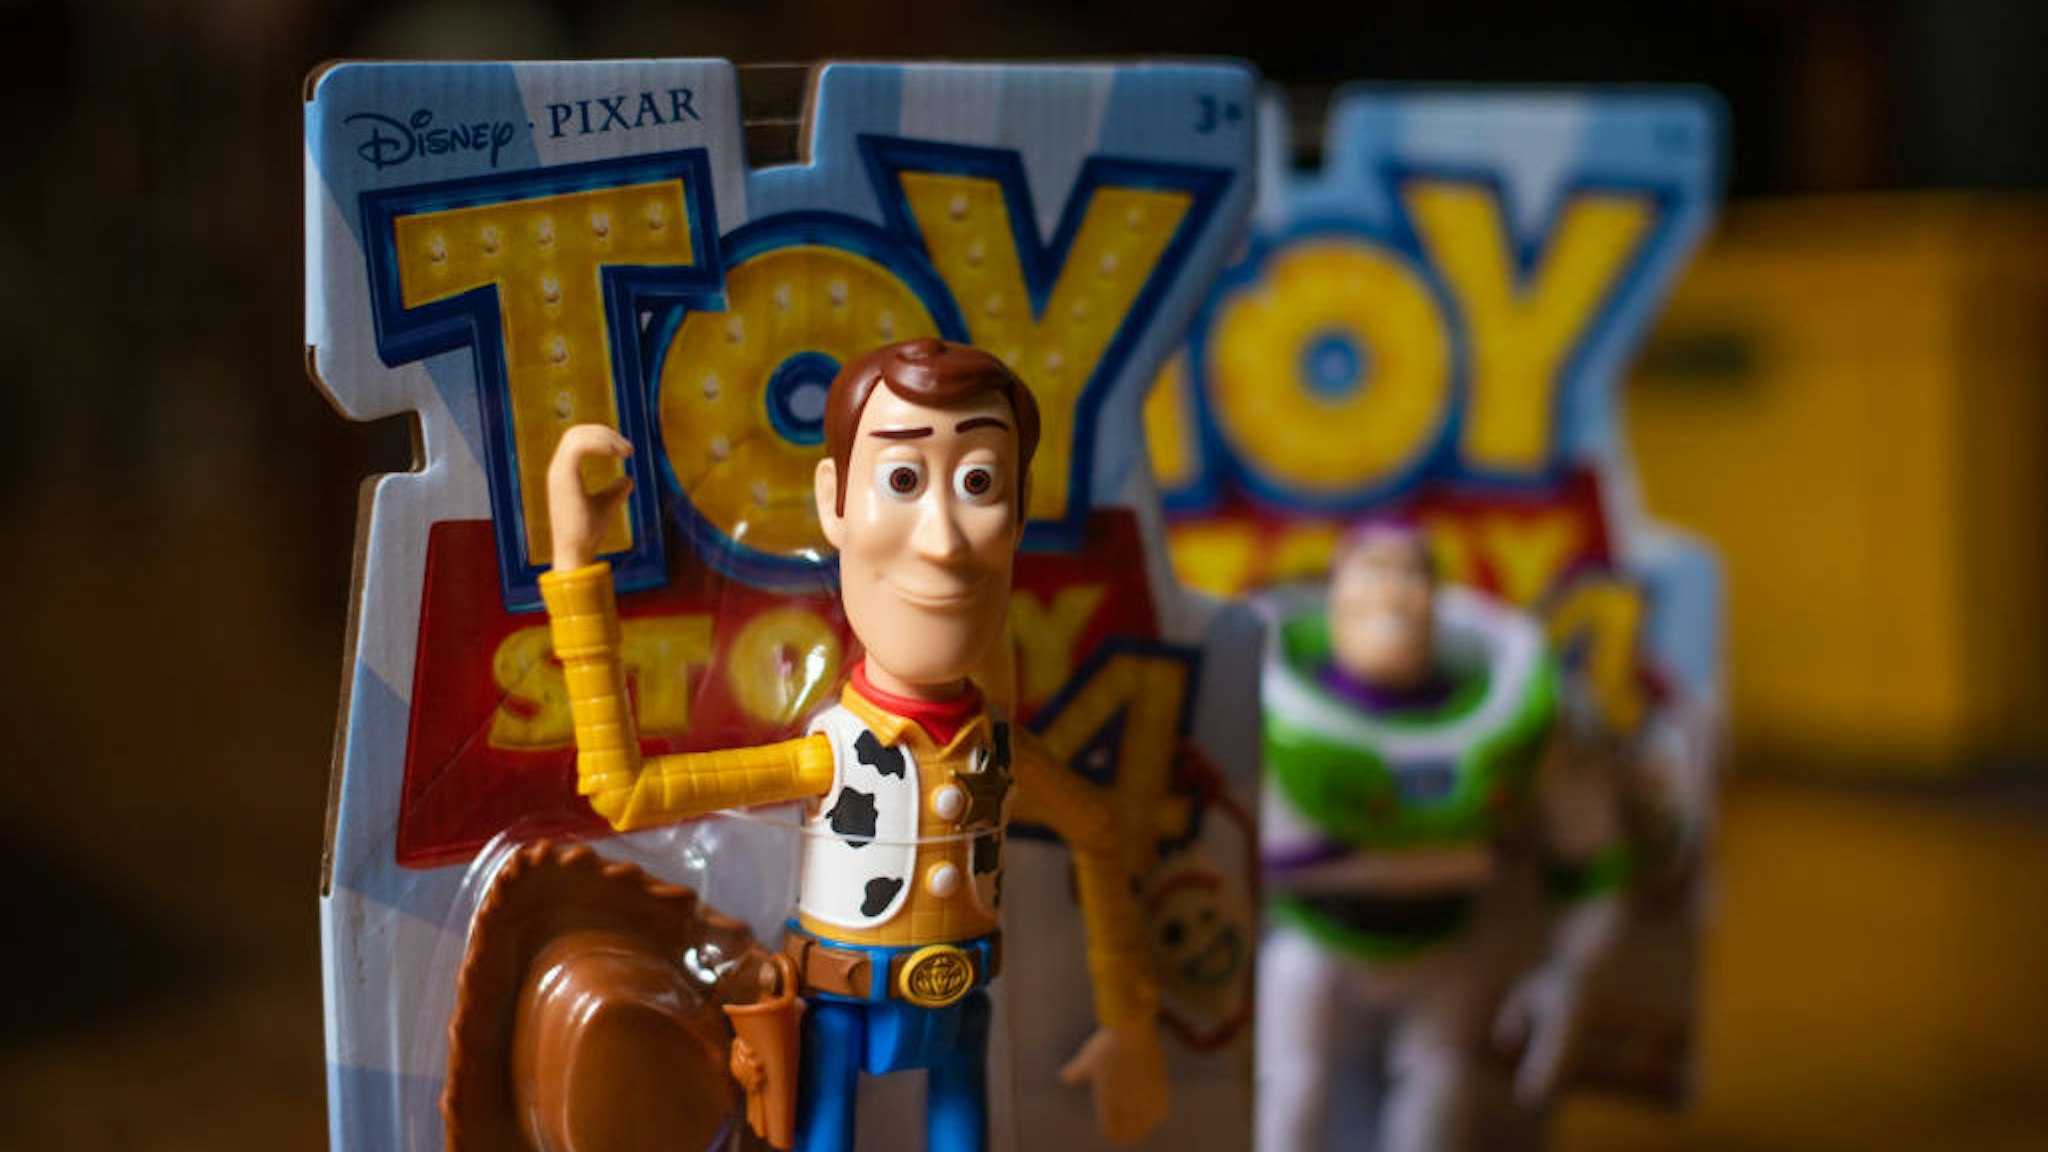 A Mattel Inc. Toy Story Woody brand figurine is arranged for a photograph in Atlanta, Georgia, U.S., on Friday, July 19, 2019. Mattel is scheduled to release earnings figures on July 25. Photographer: Tiffany Hagler-Geard/Bloomberg